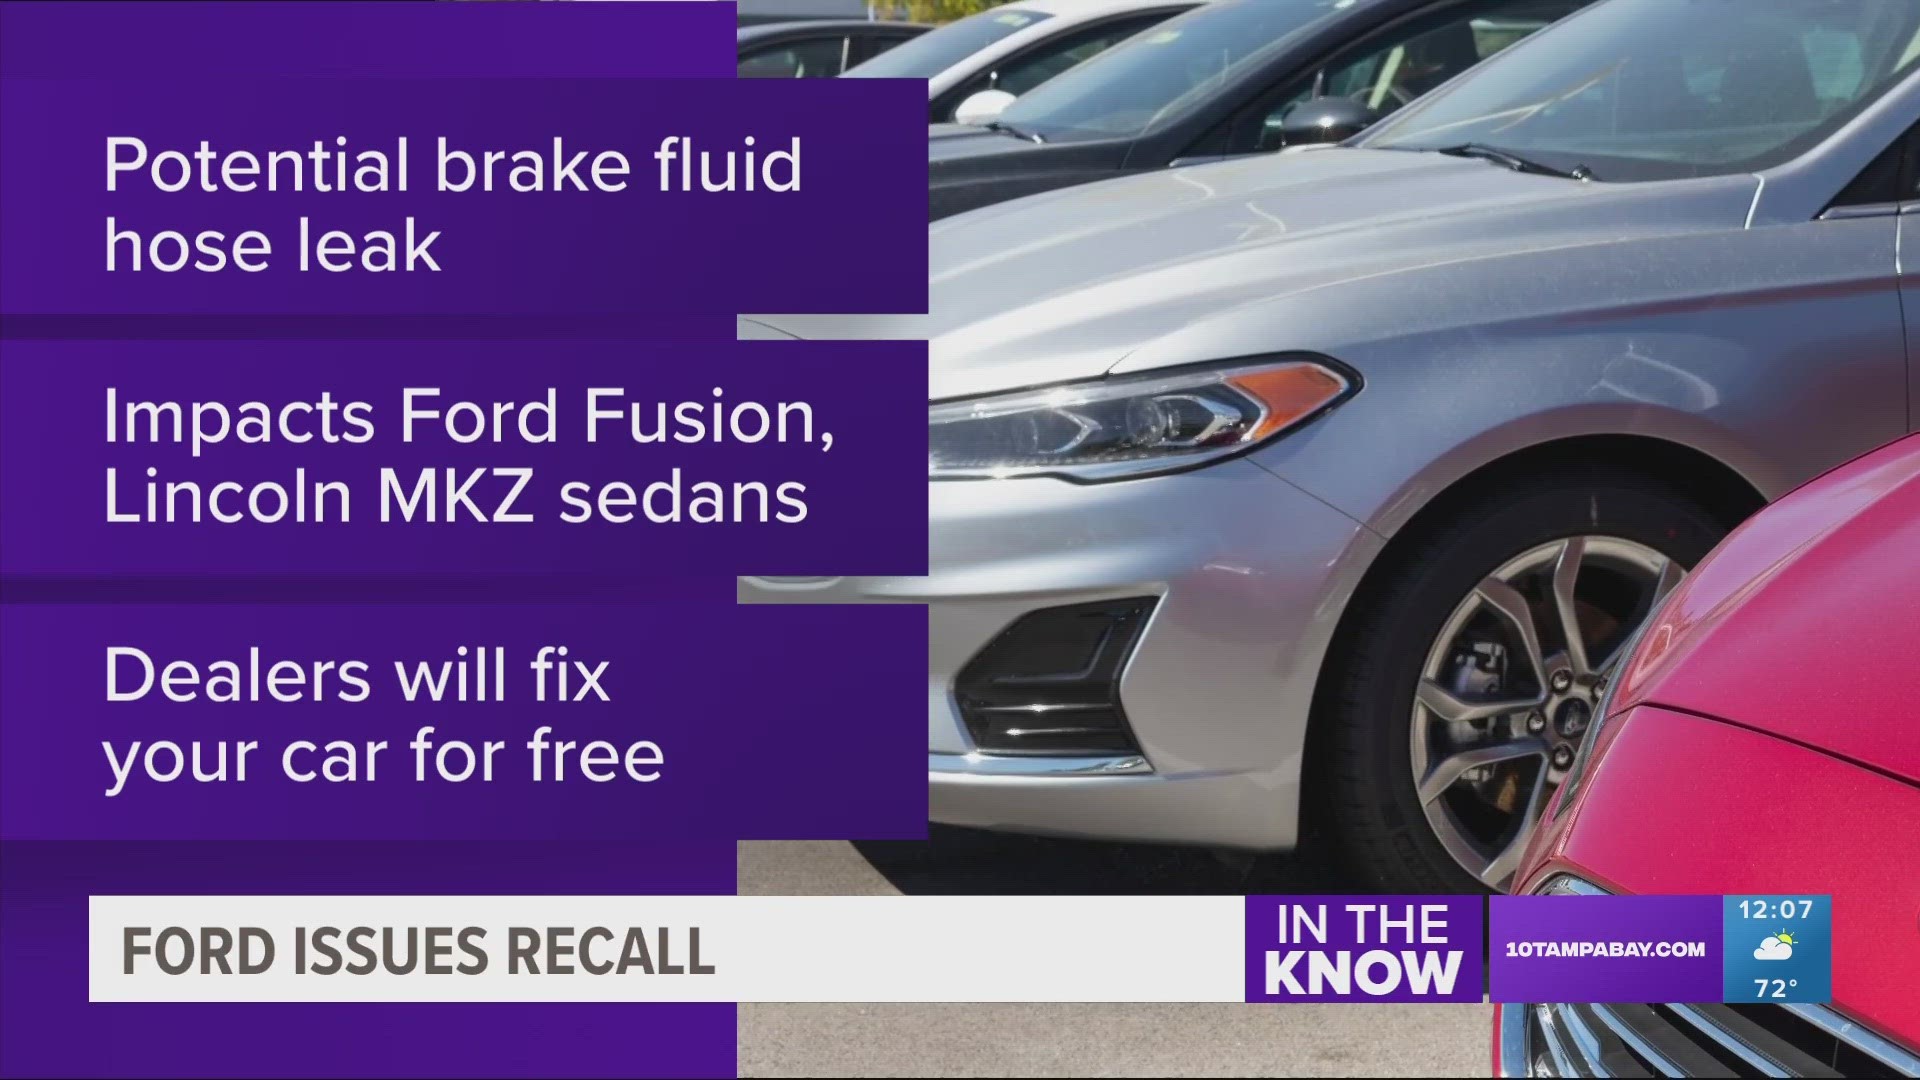 Ford warned the recalled vehicles would take longer to stop if the hoses rupture and leak brake fluid.